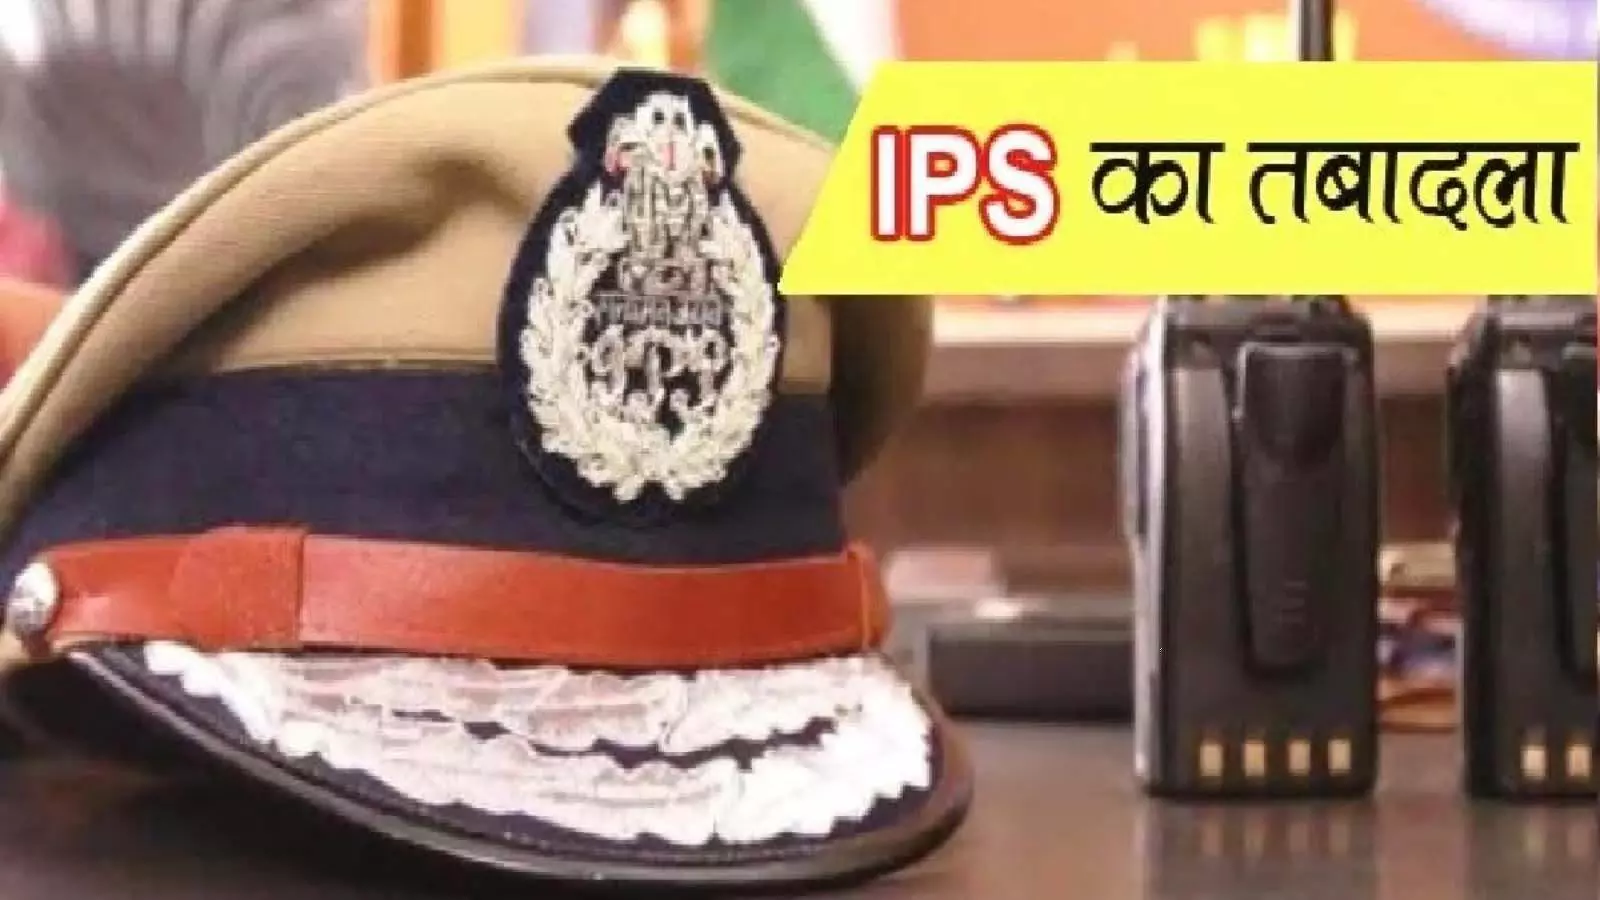 Transfer of IPS Officers in UP, see list